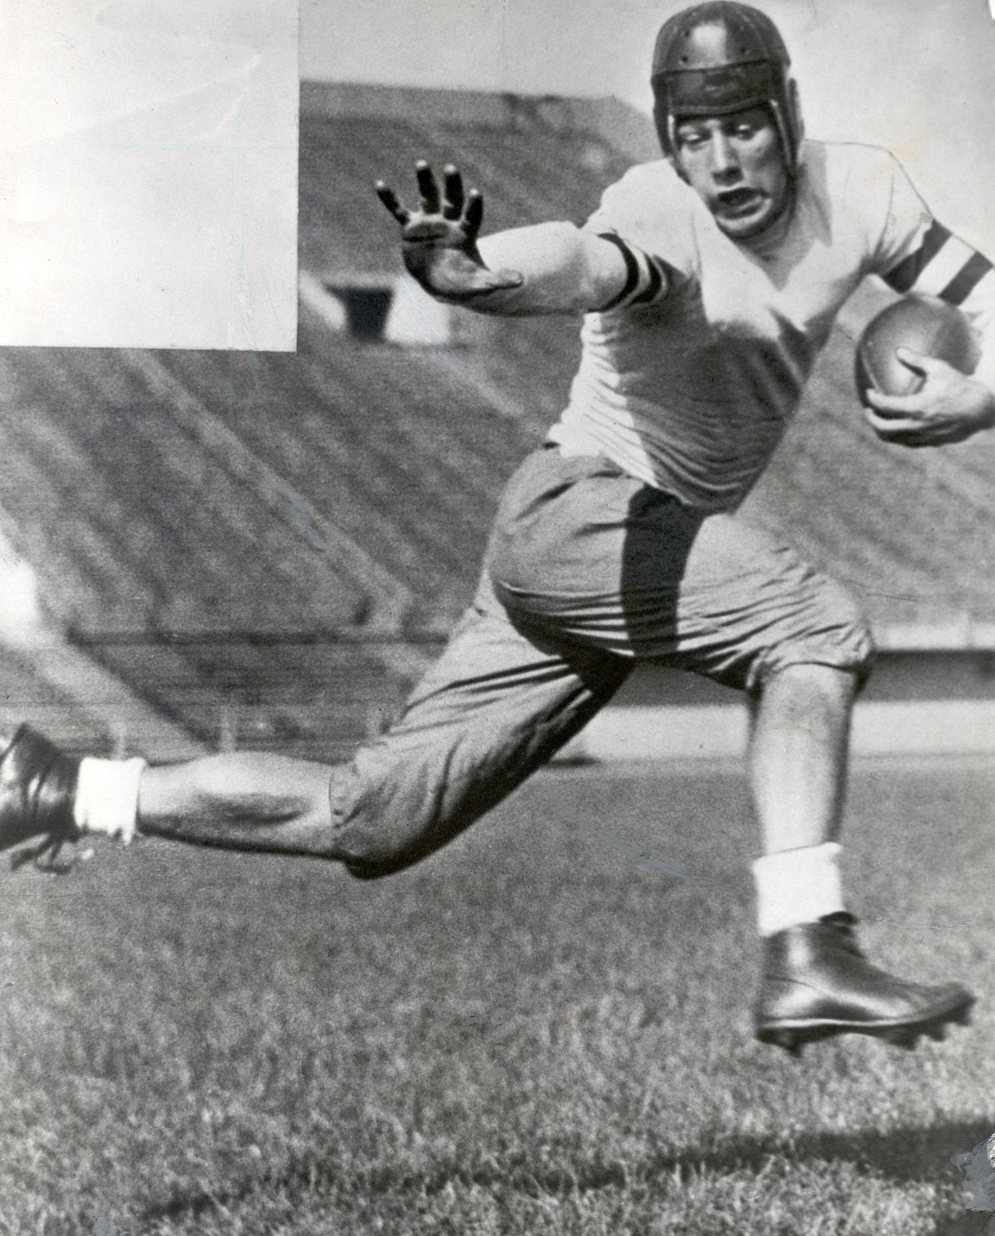 University of Chicago star Jay Berwanger won the first Heisman Trophy and was the first overall pick in the 1936 draft, but he chose a job selling foam rubber over playing in the NFL; he would later launch a successful manufacturing business. (Pro Football Hall of Fame)